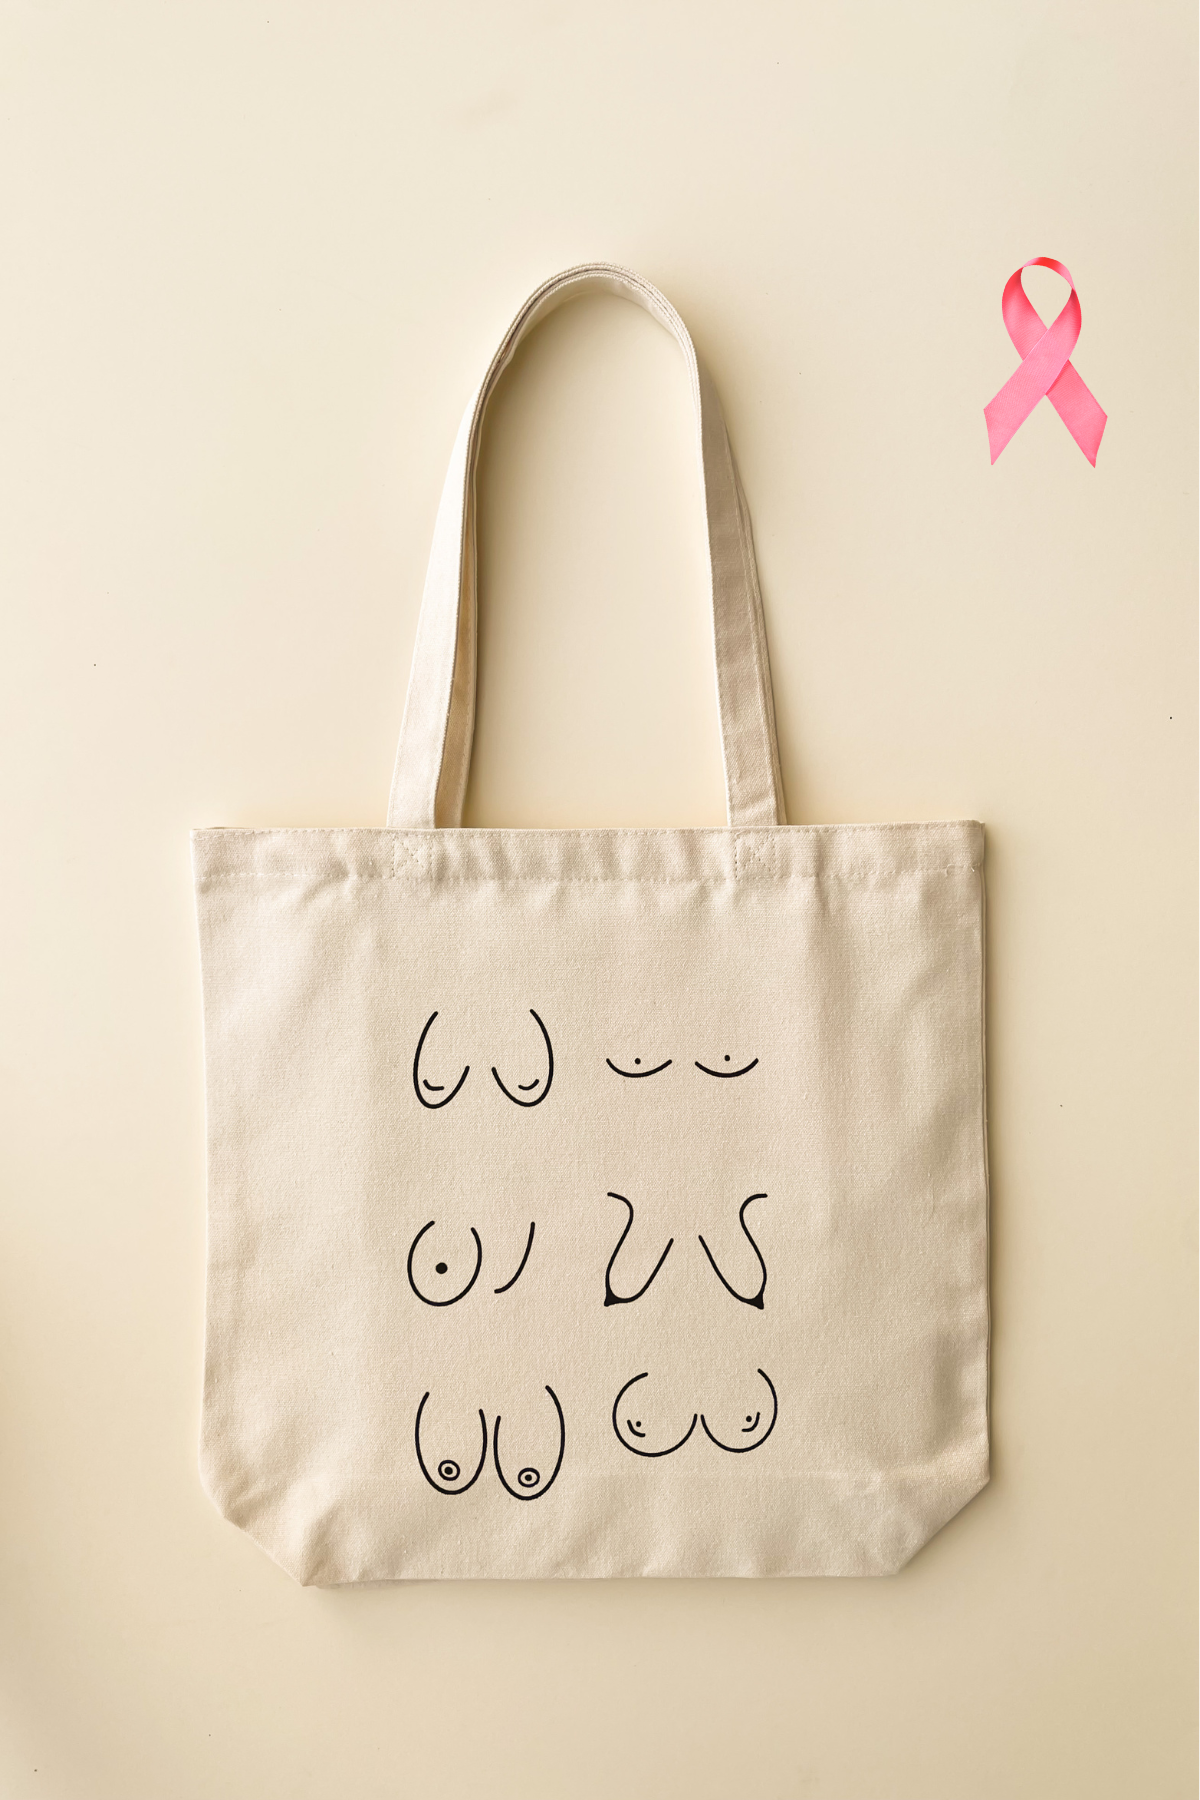 Boob Titty tote bag for breast cancer awareness